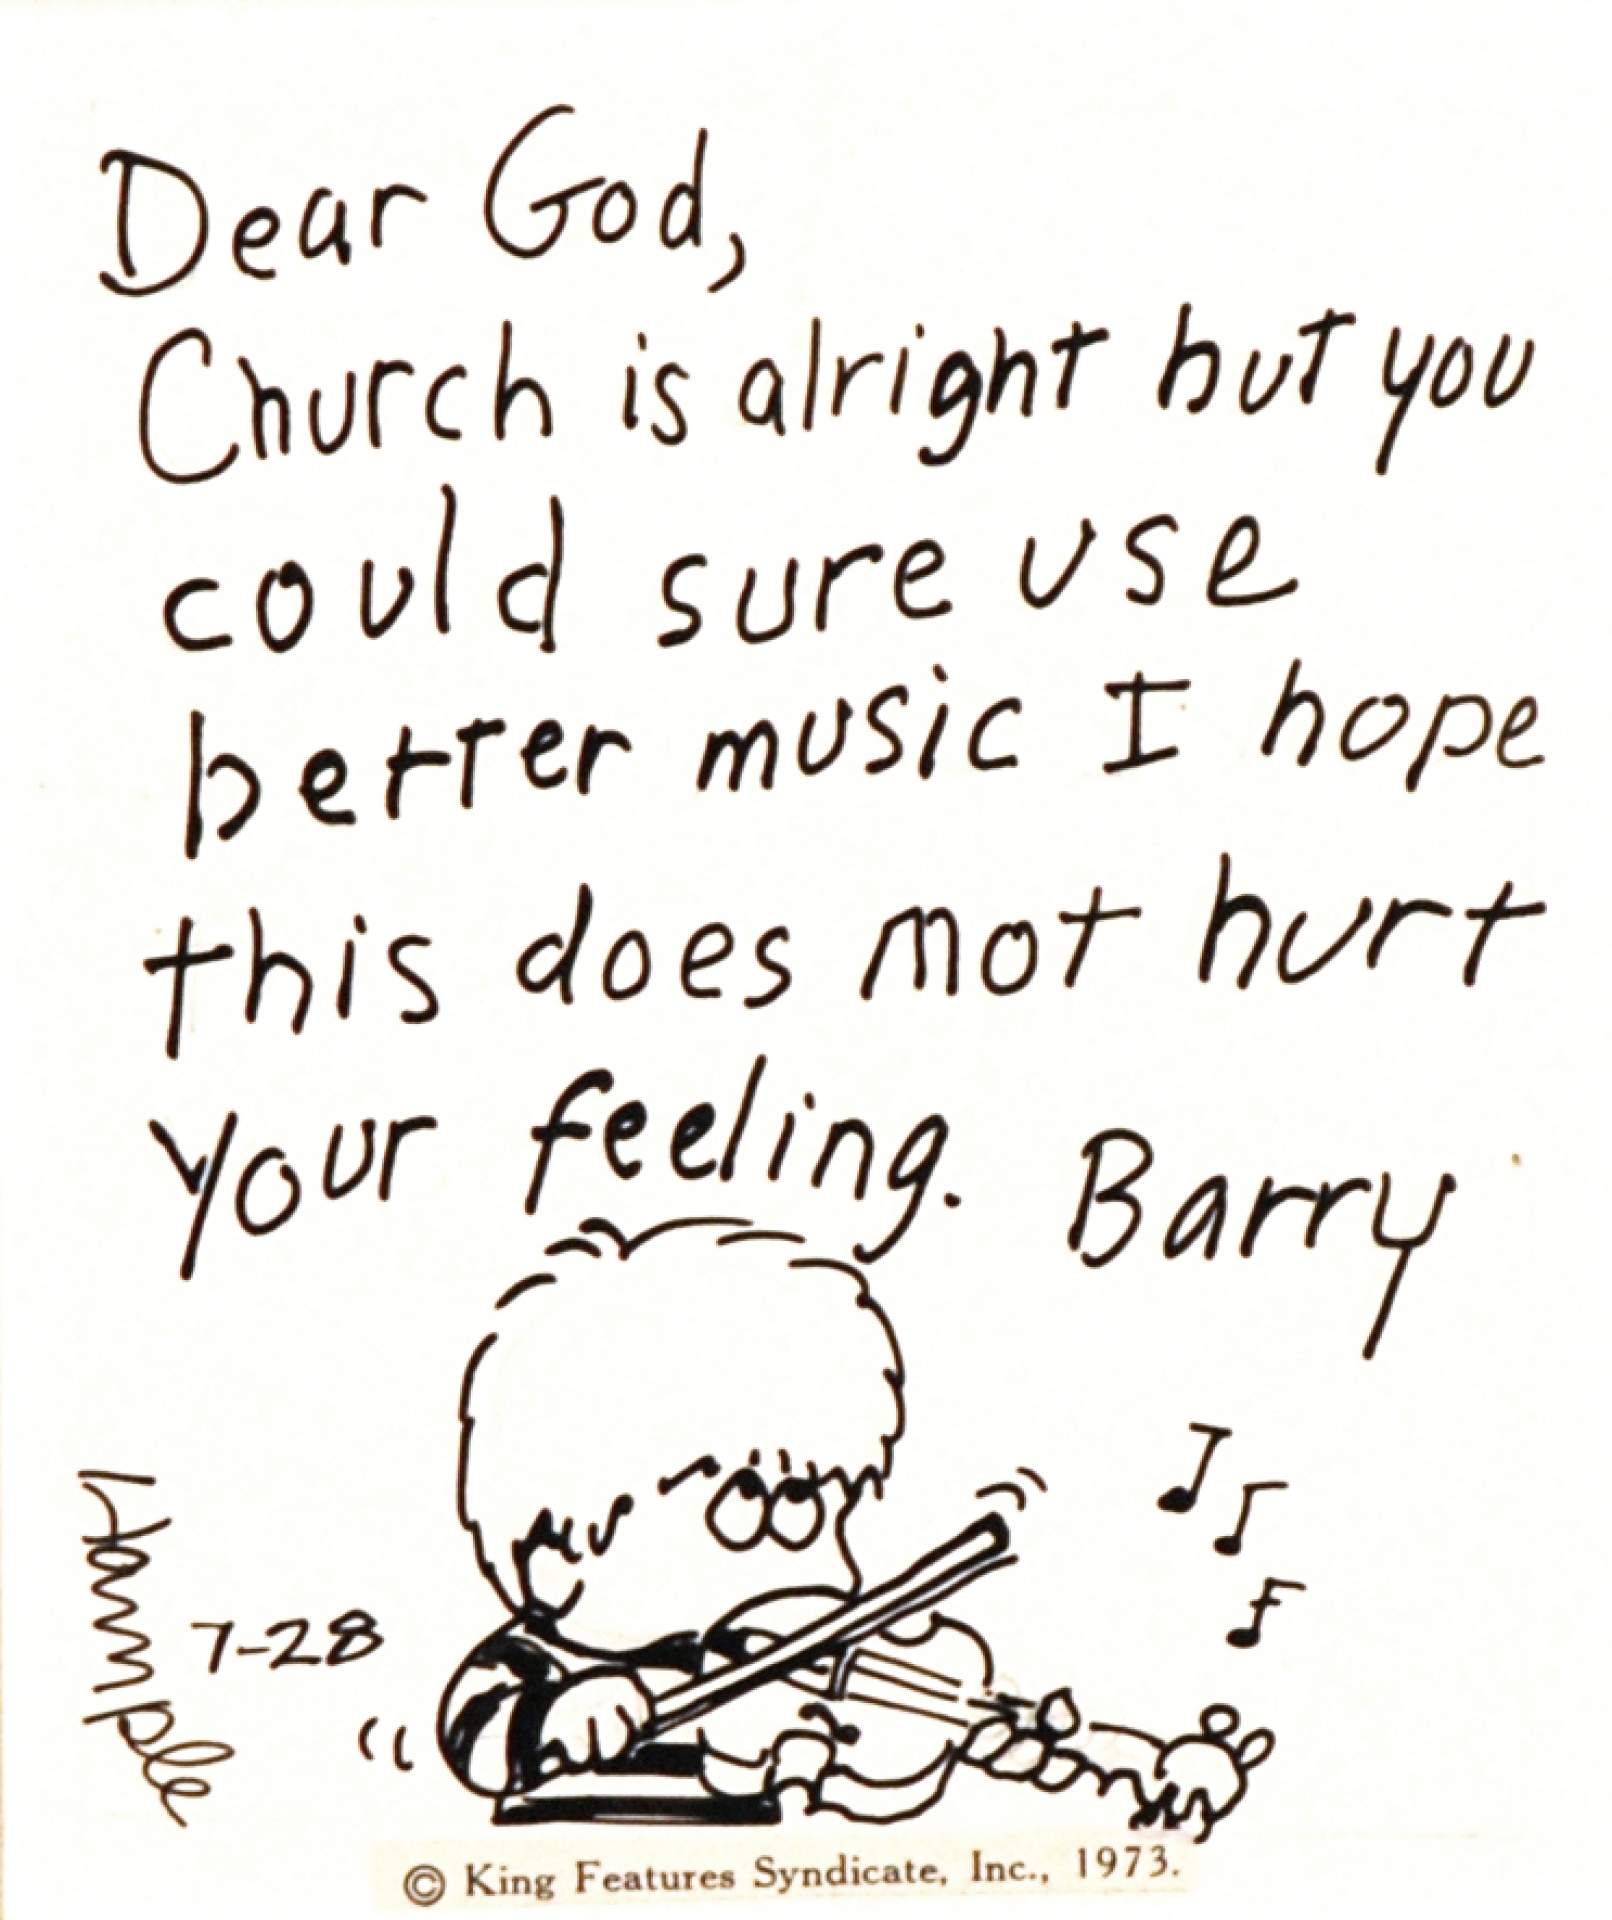 Untitled [Dear God, Church is alright but you could sure use better music I hope this does not hurt your feeling. Barry]